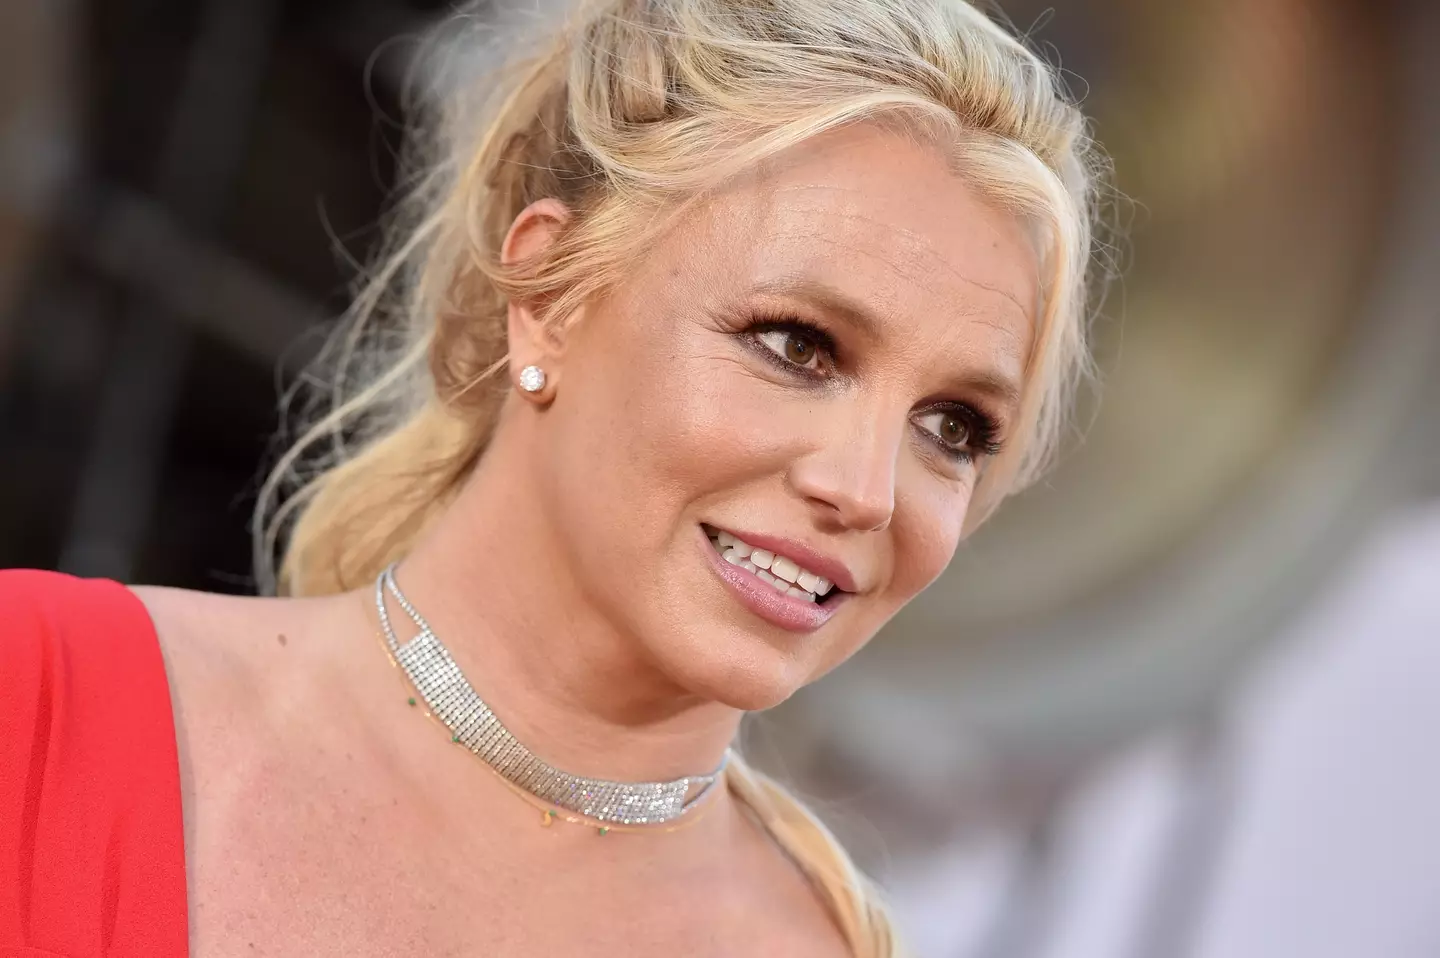 When news broke of what Britney had to go through, fans were left stunned, and many offered their support to the star. (Axelle/Bauer-Griffin/FilmMagic)